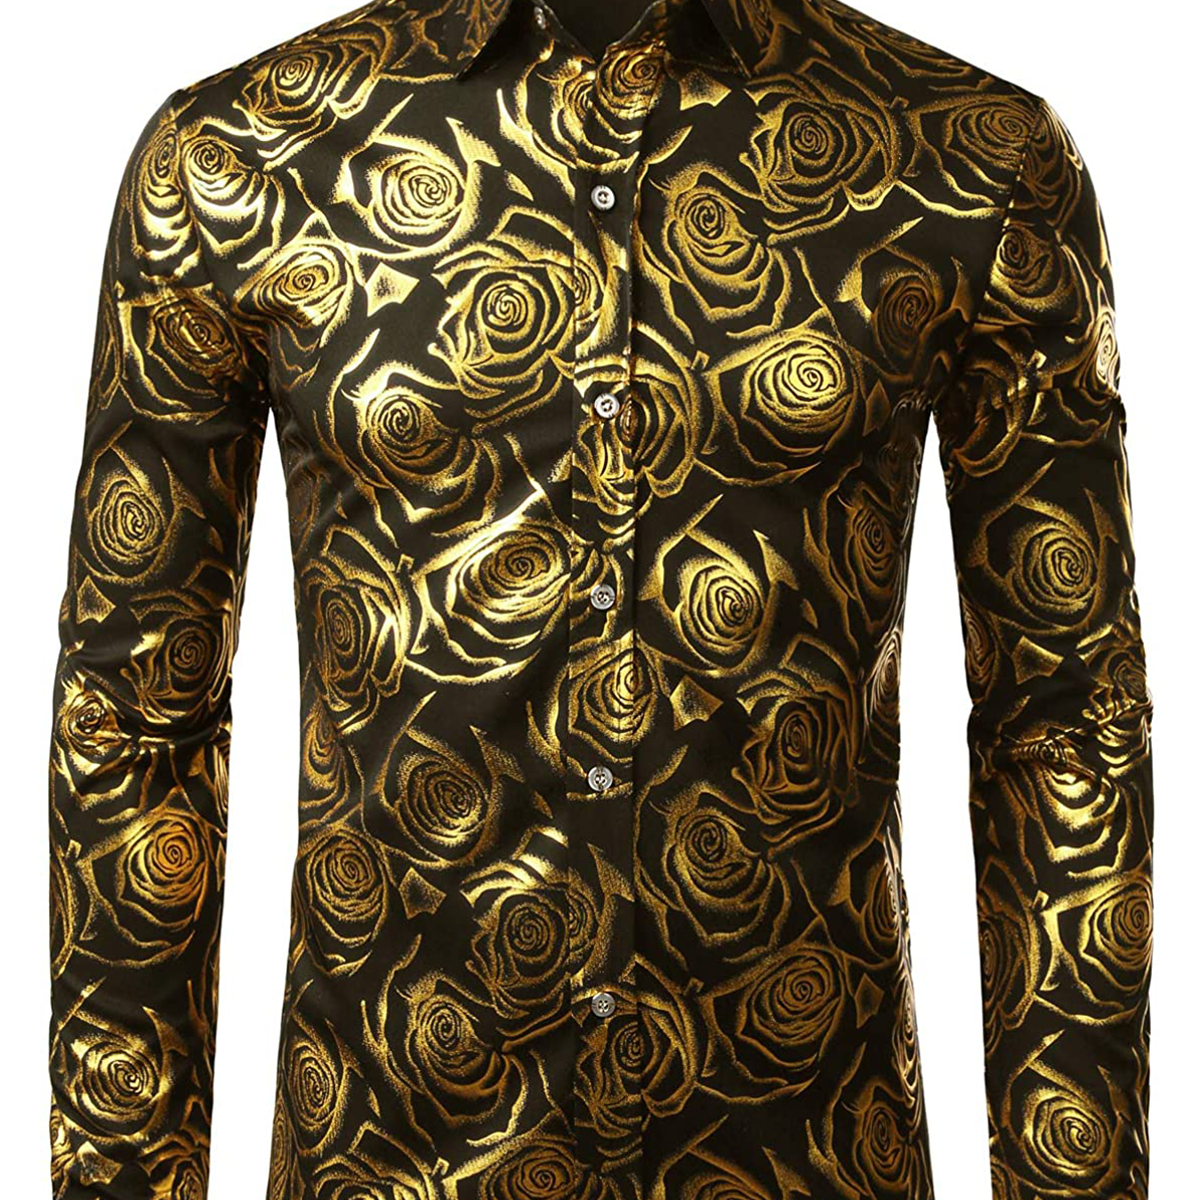 Men's Floral Print Long Sleeve Casual Button Up Shirt